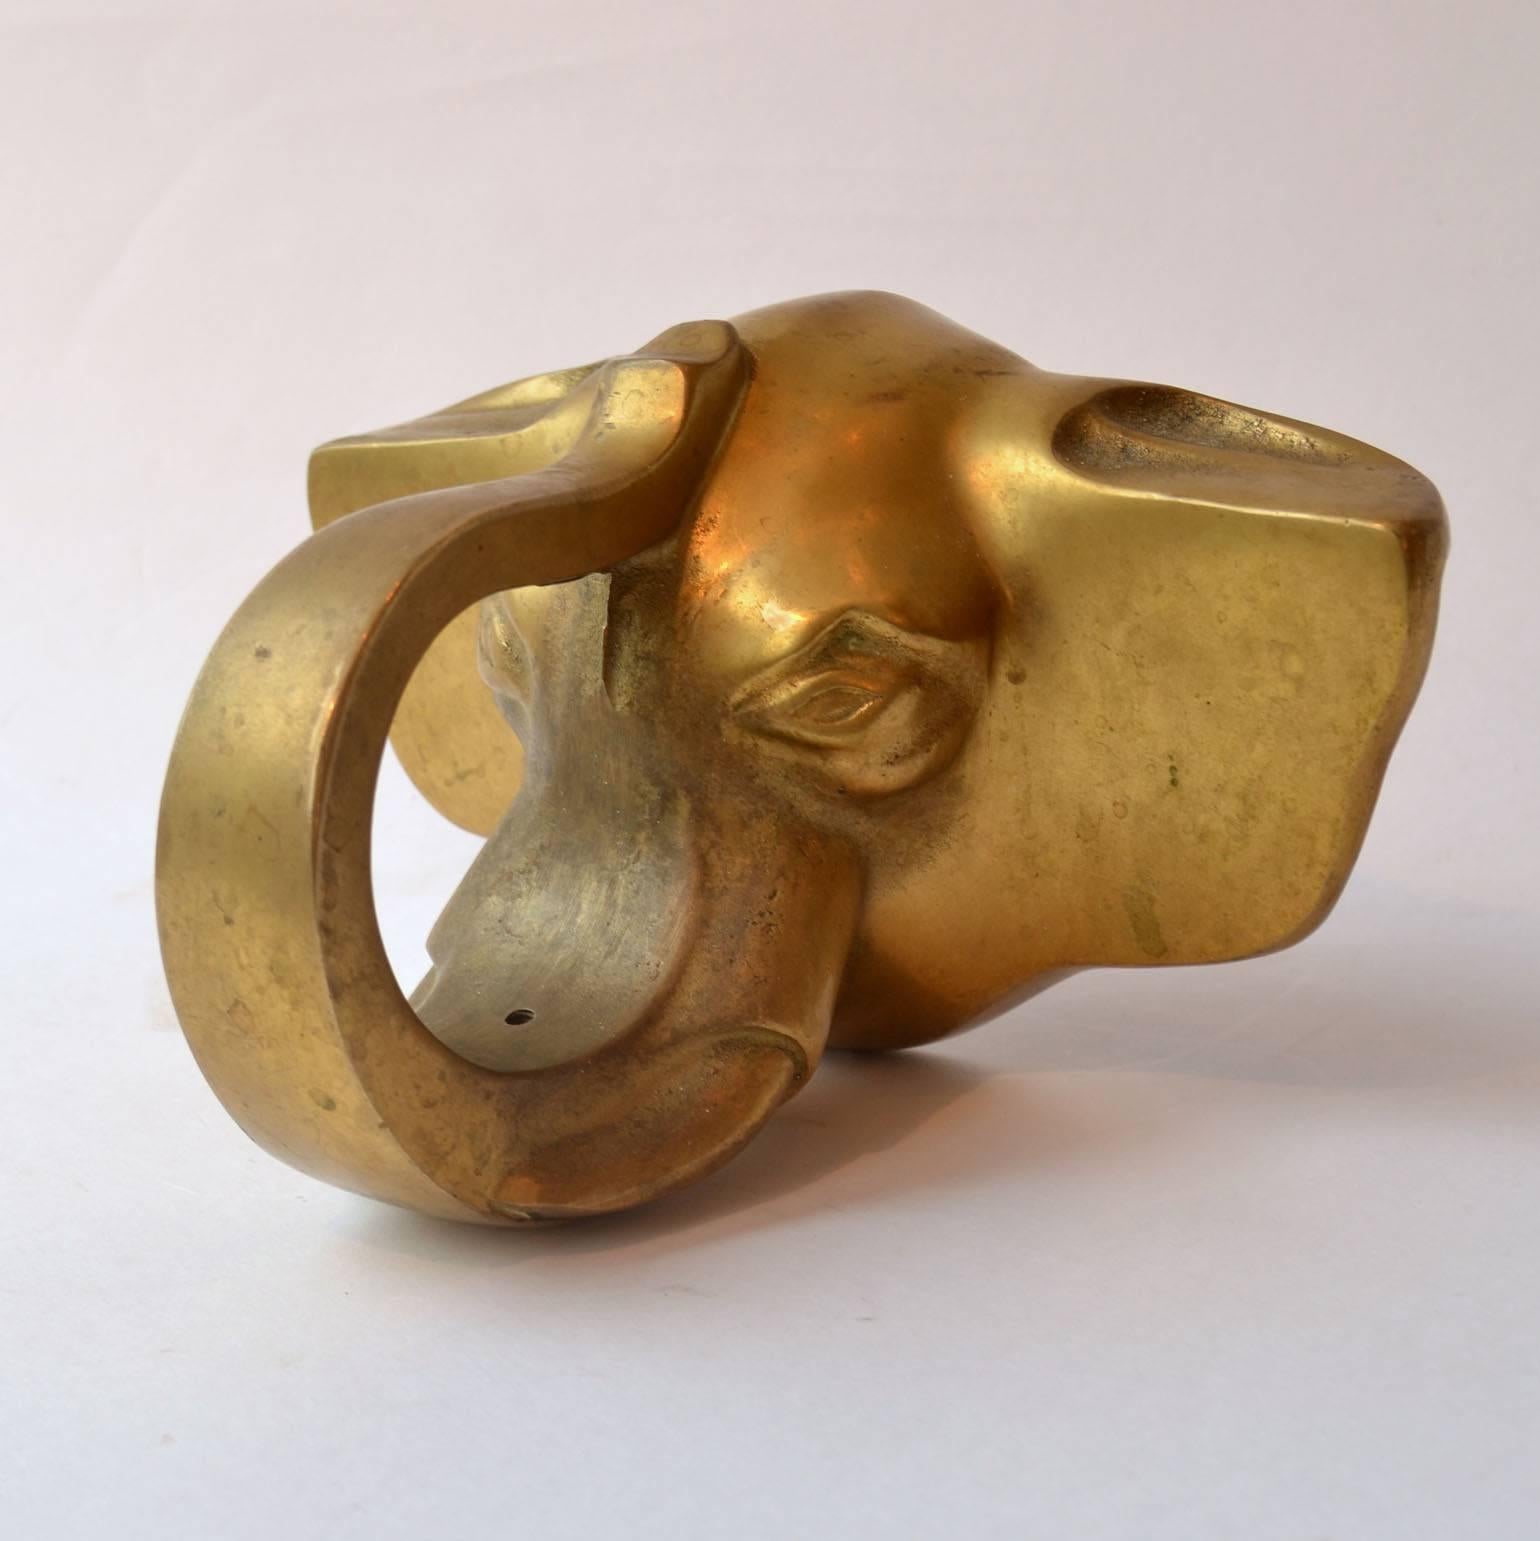 Door handle, solid cast bronze , of a large elephant head with trunk as grip. it is to be mounted in the middle of the front of an entry door on top of a plinth or raised edge. This decorative handle came from Art Deco oak front door in the